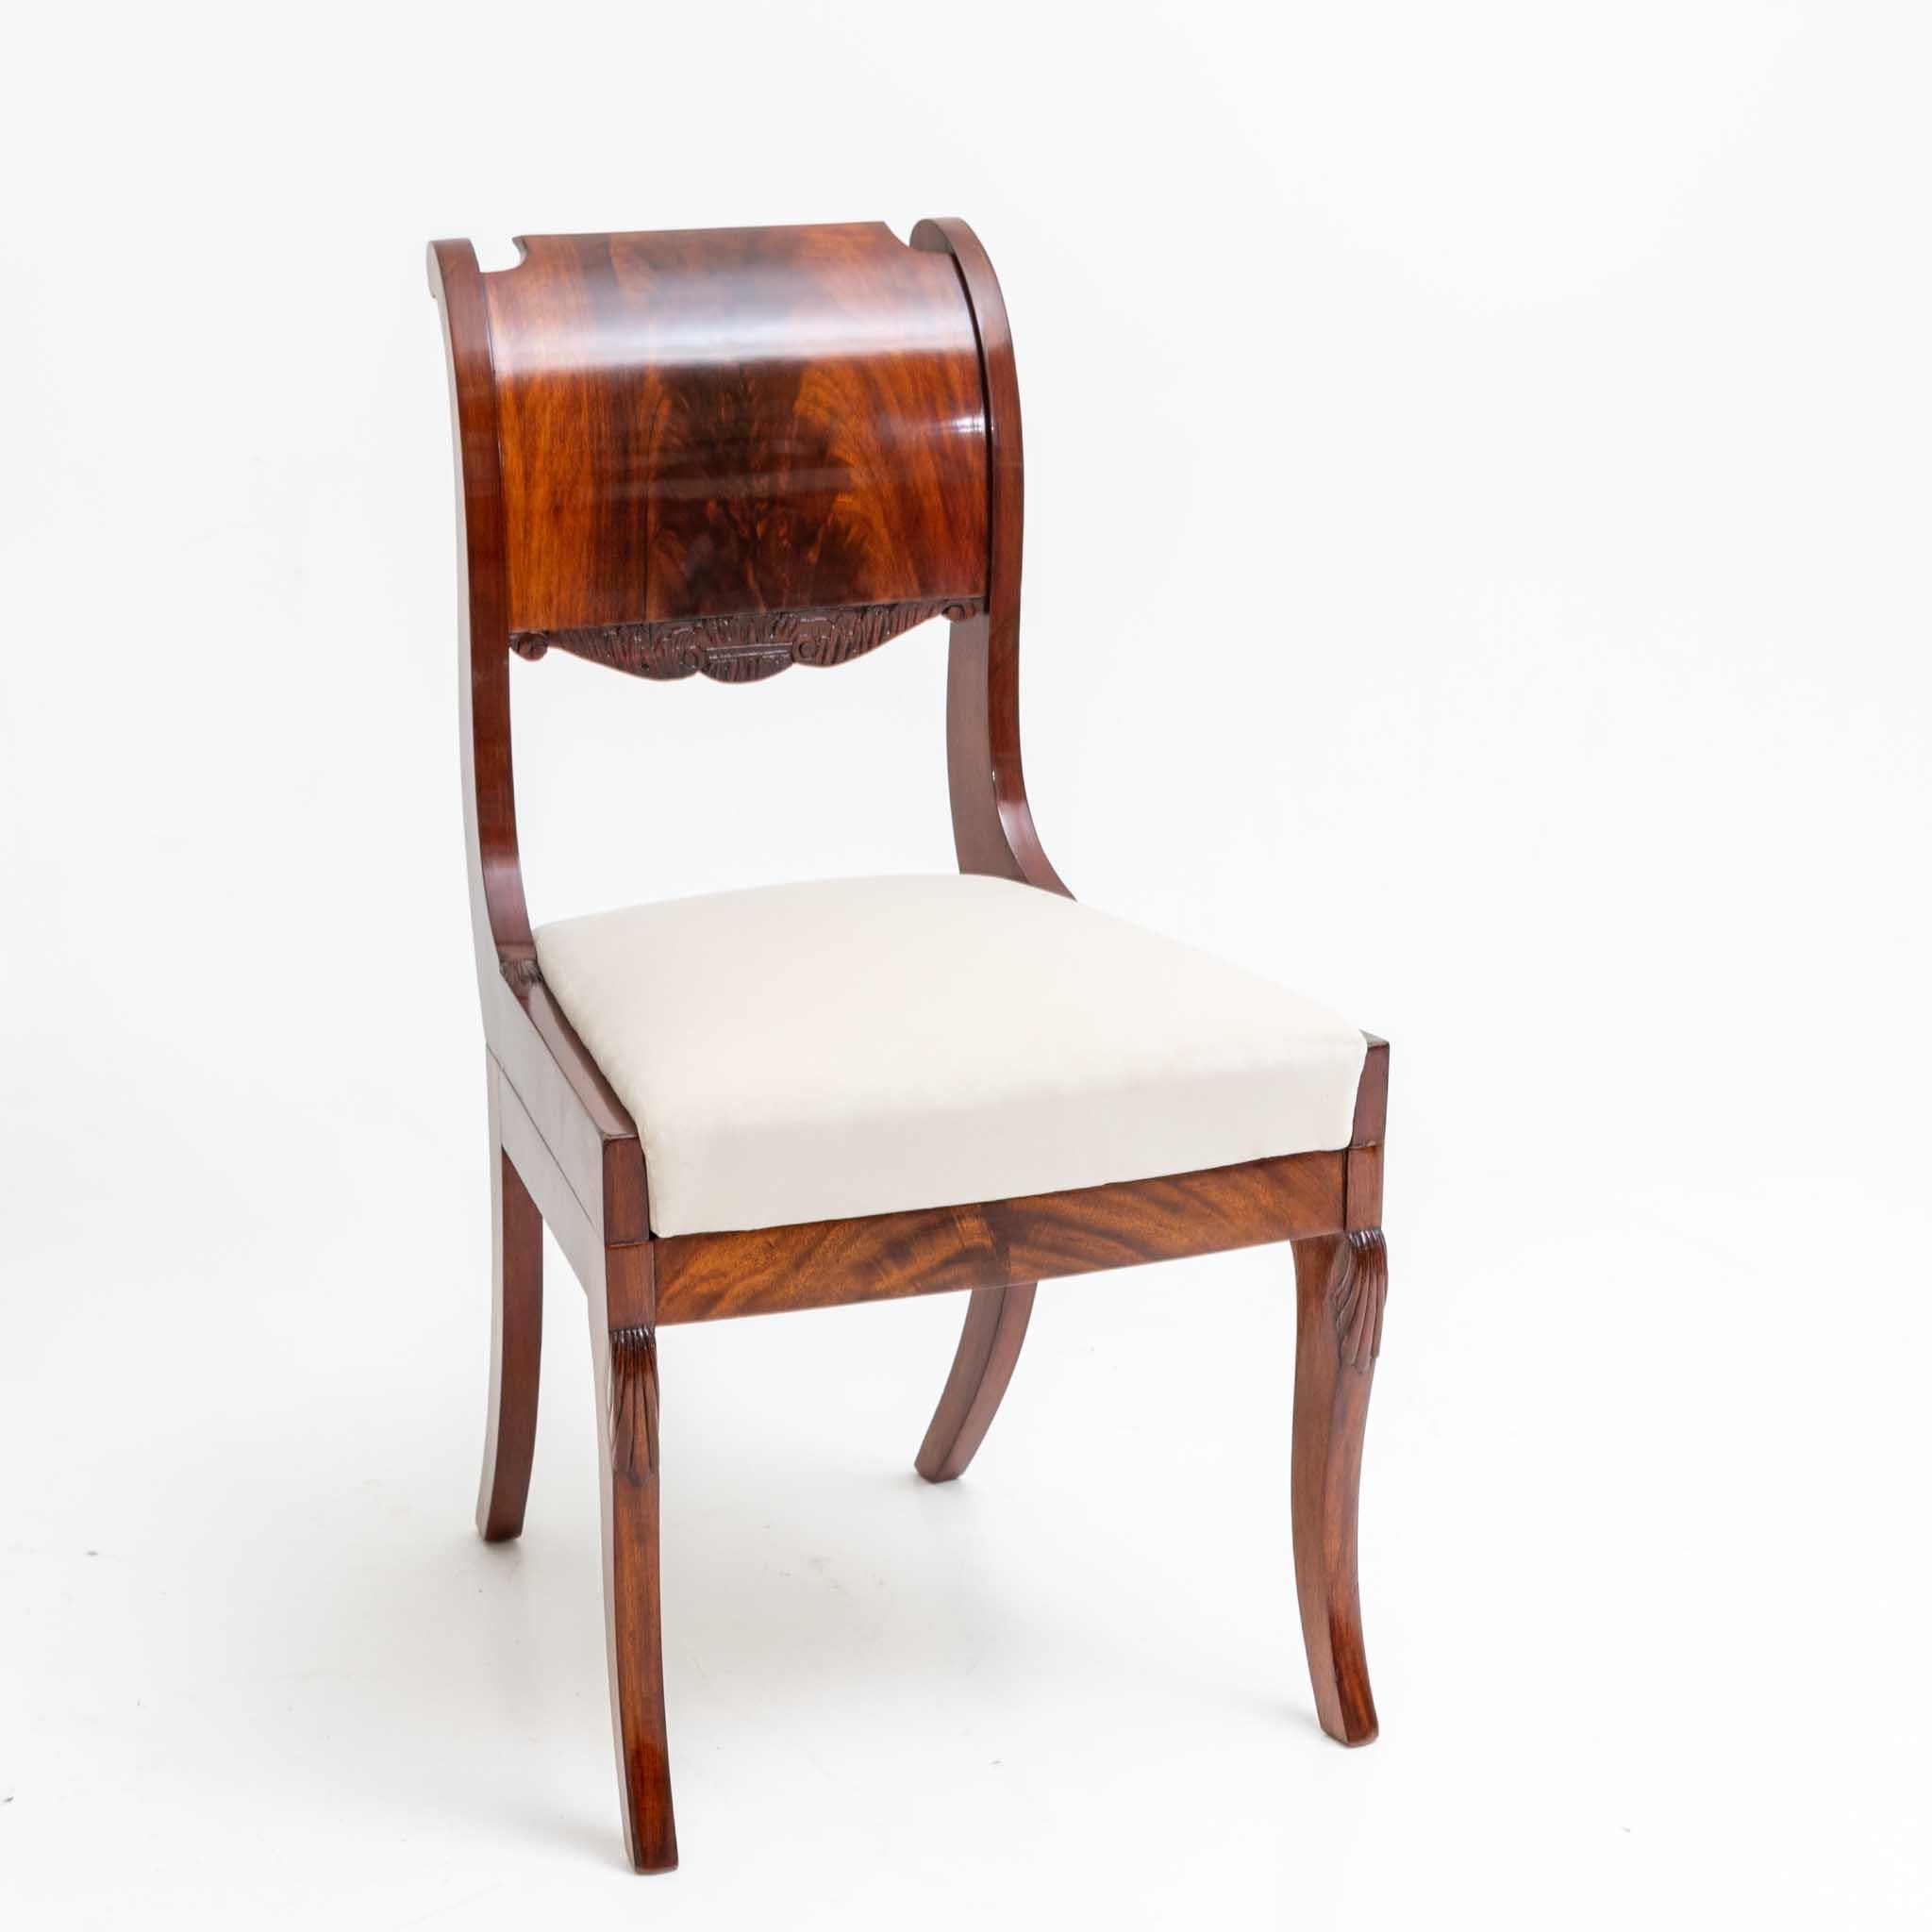 Pair of chairs with mahogany veneered frame and curved, slightly convex backs. The seats are newly covered with a white fabric. The chairs have been restored and hand polished.